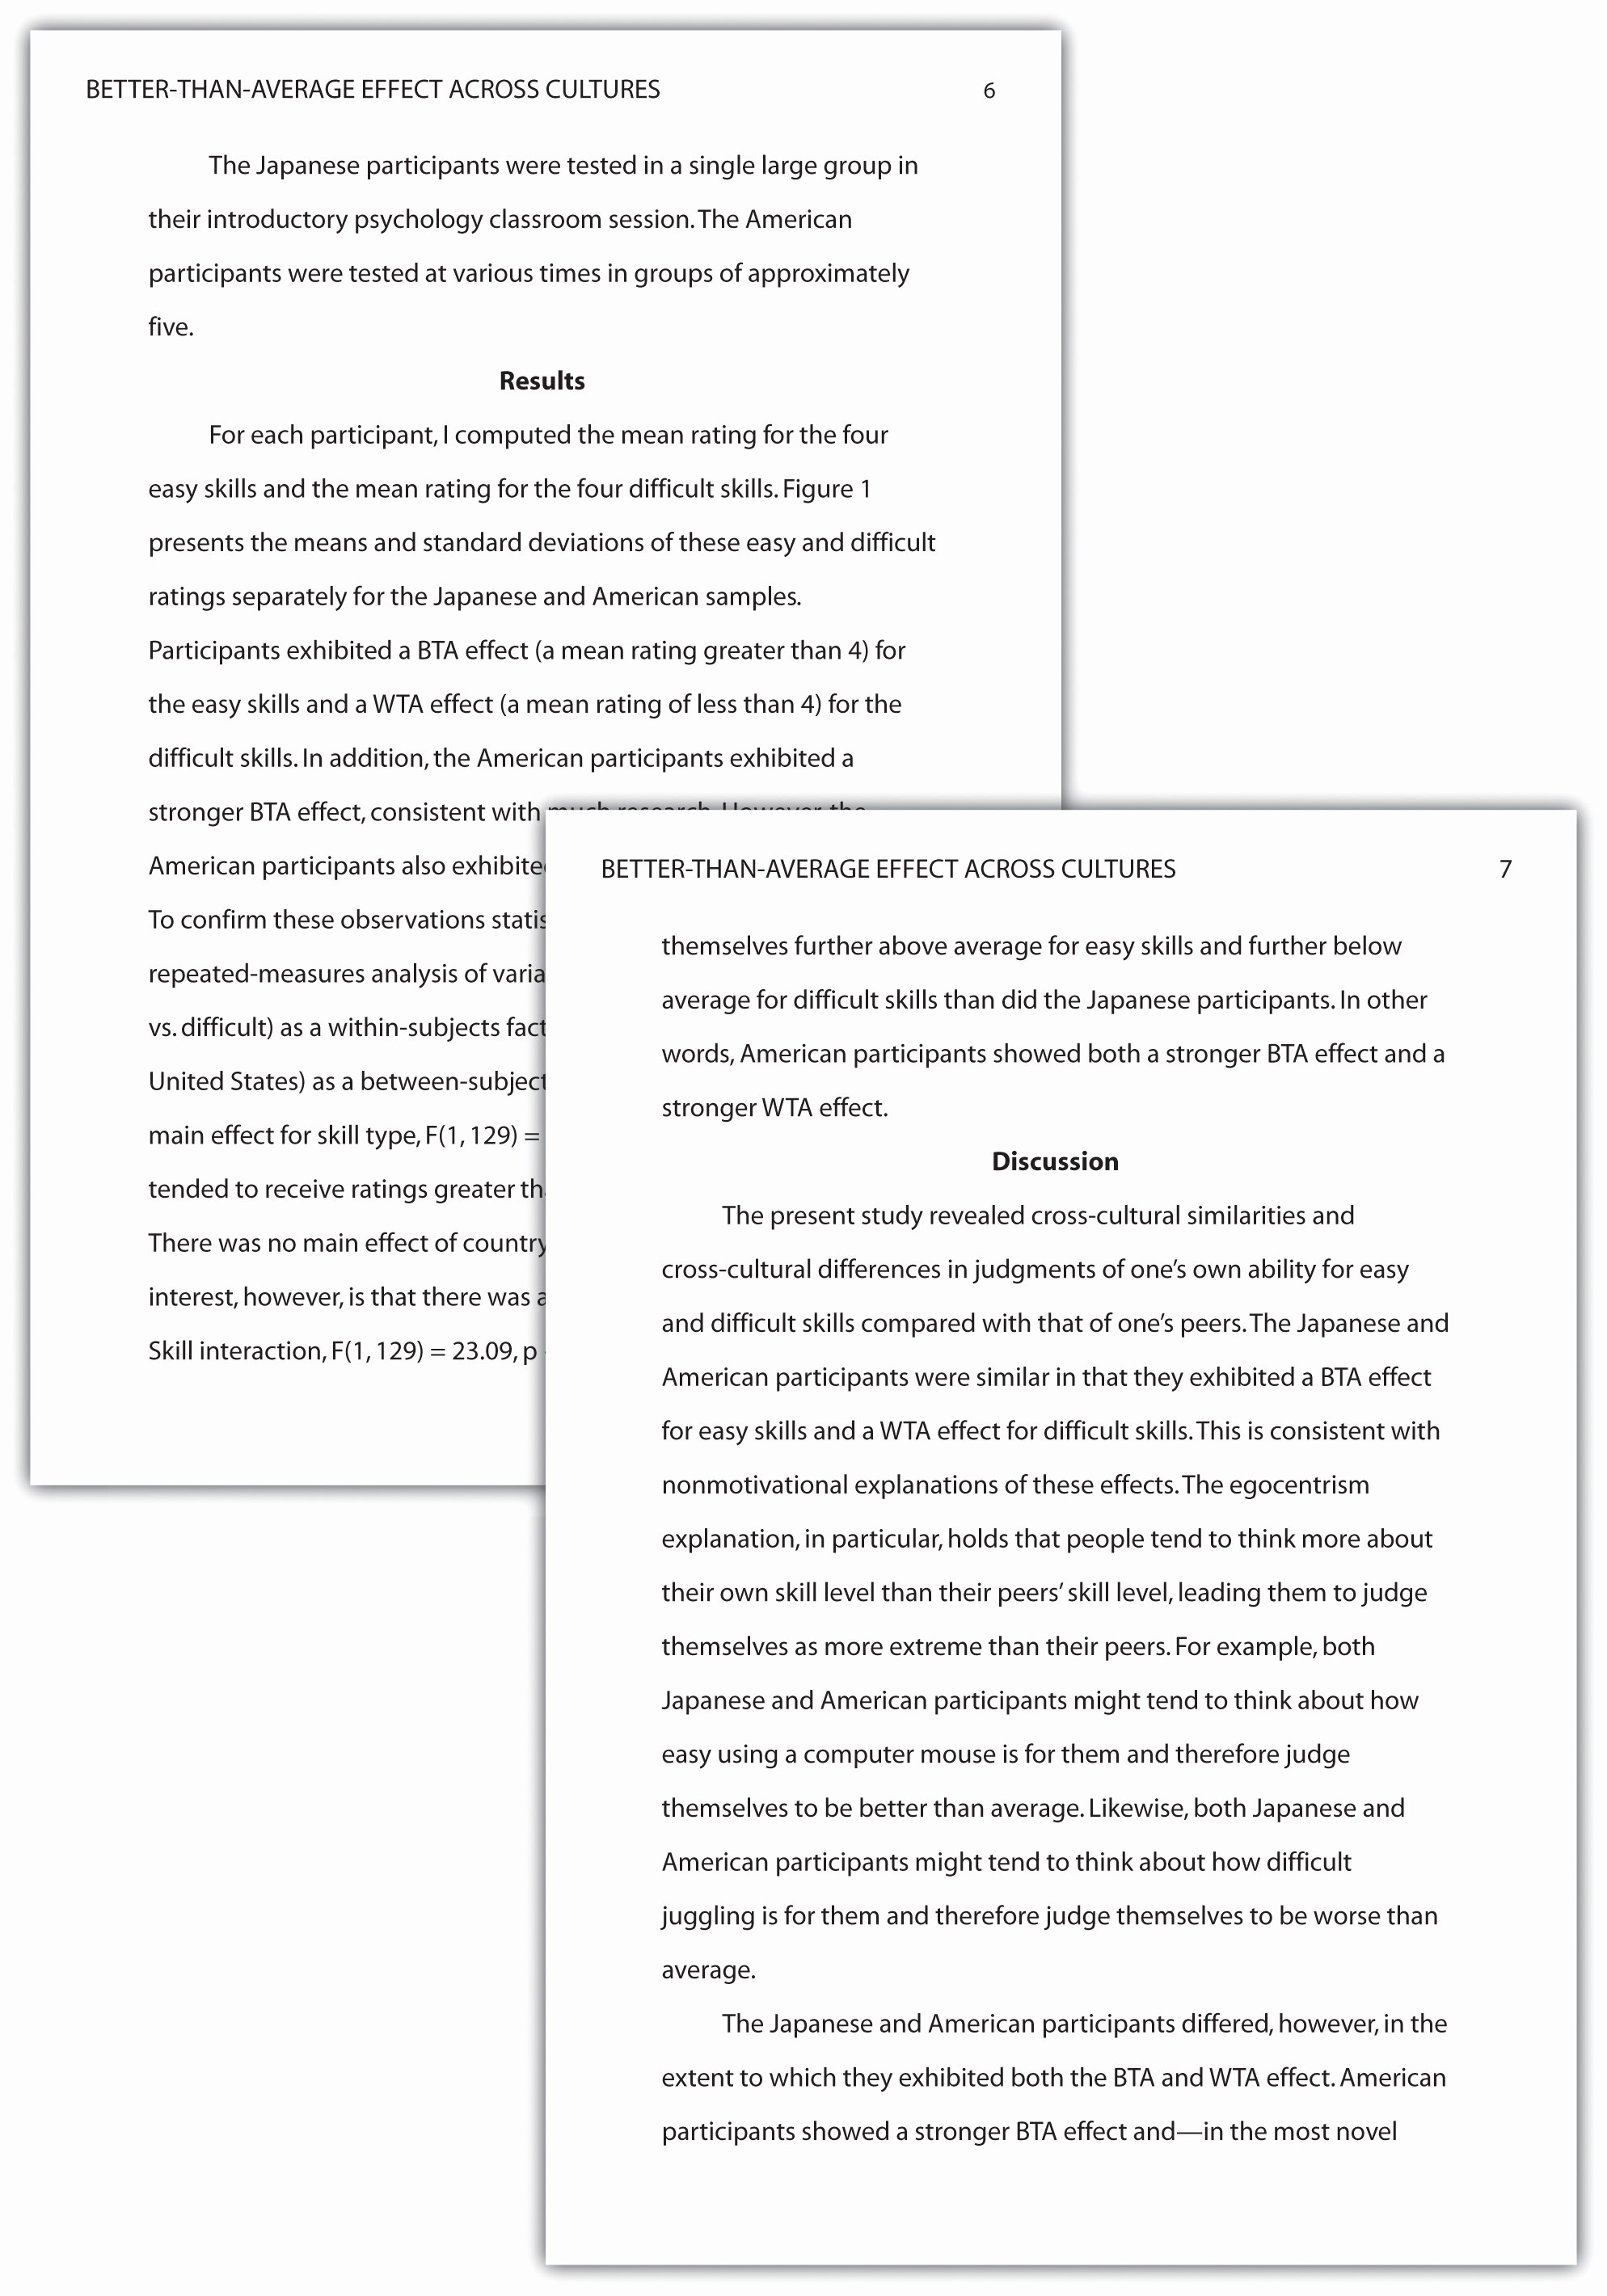 Apa format for A Report Inspirational Writing A Research Report In American Psychological